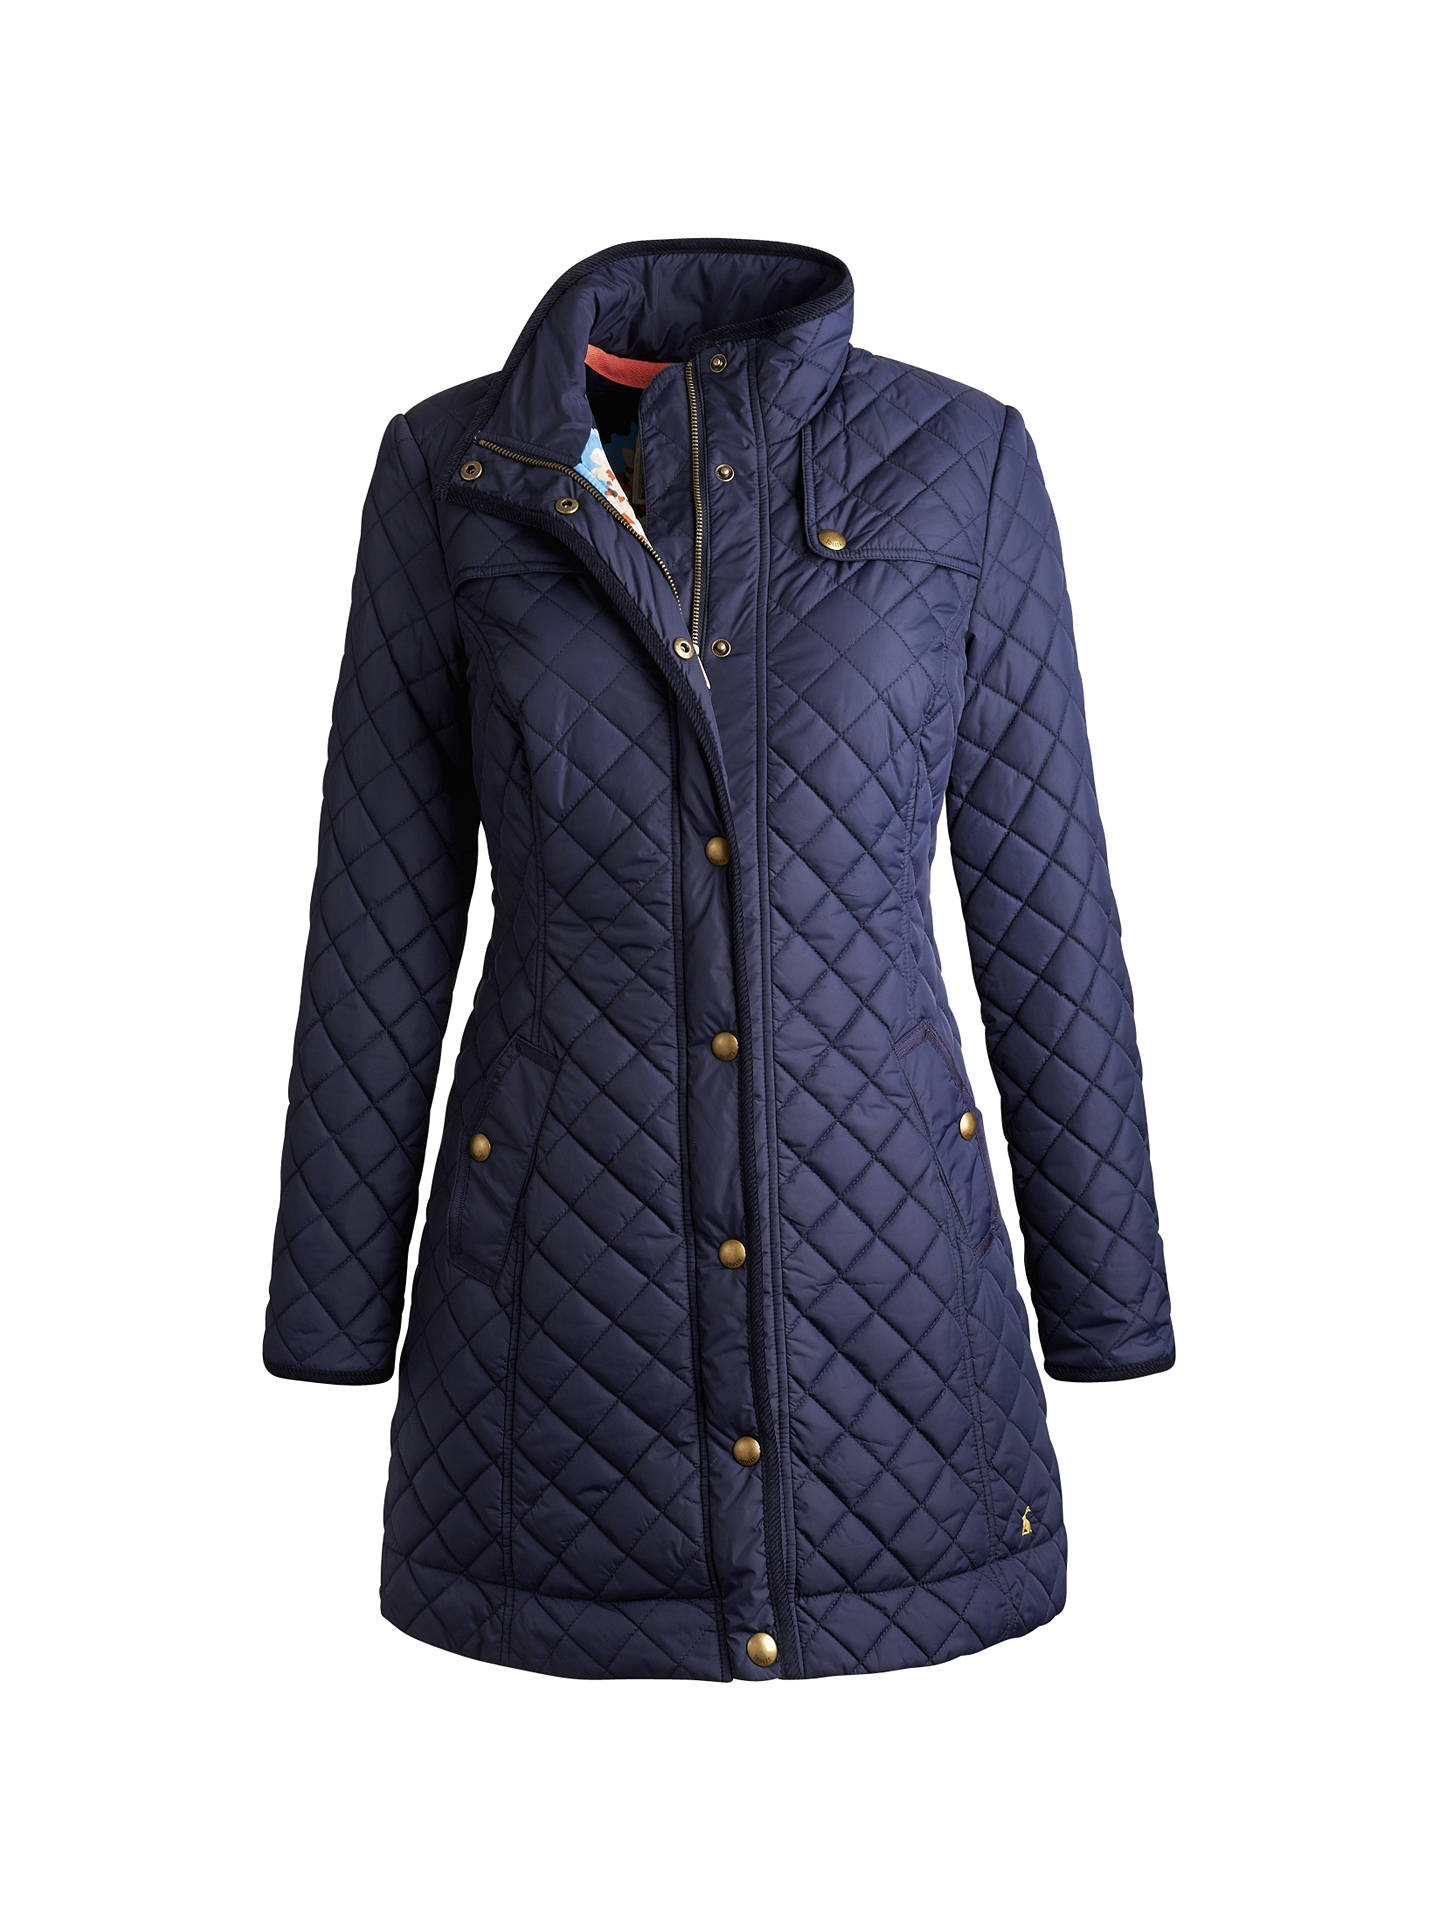 Joules Fairhurst Quilted Jacket, Navy at John Lewis & Partners